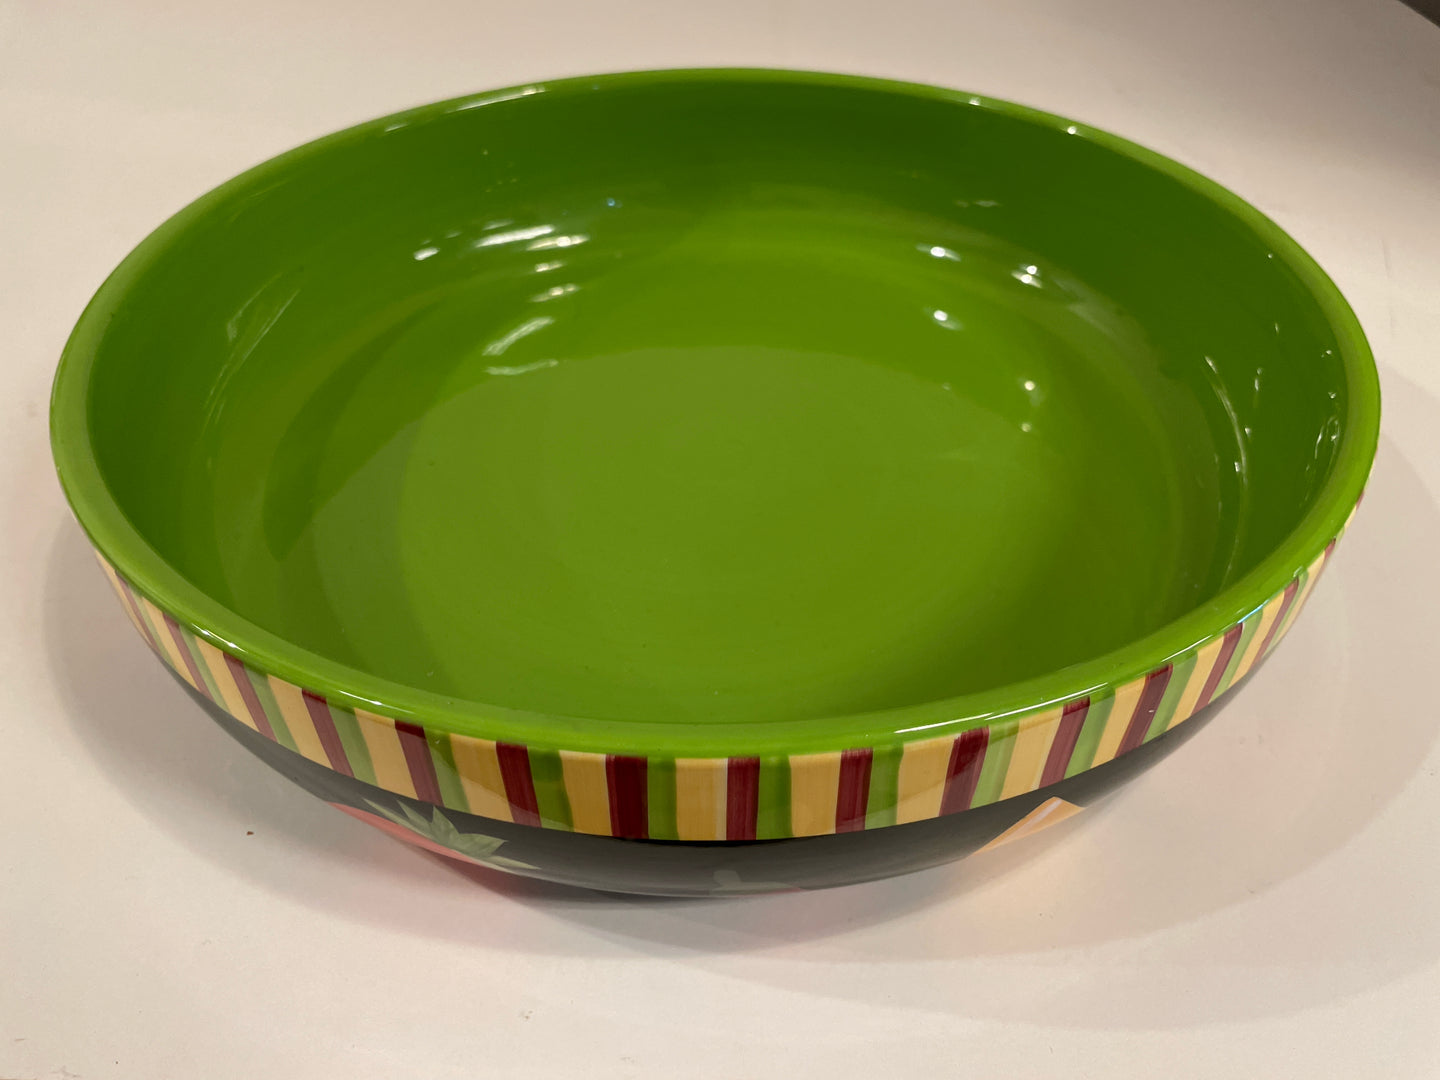 Colorful Serving Bowl from Crate & Barrel